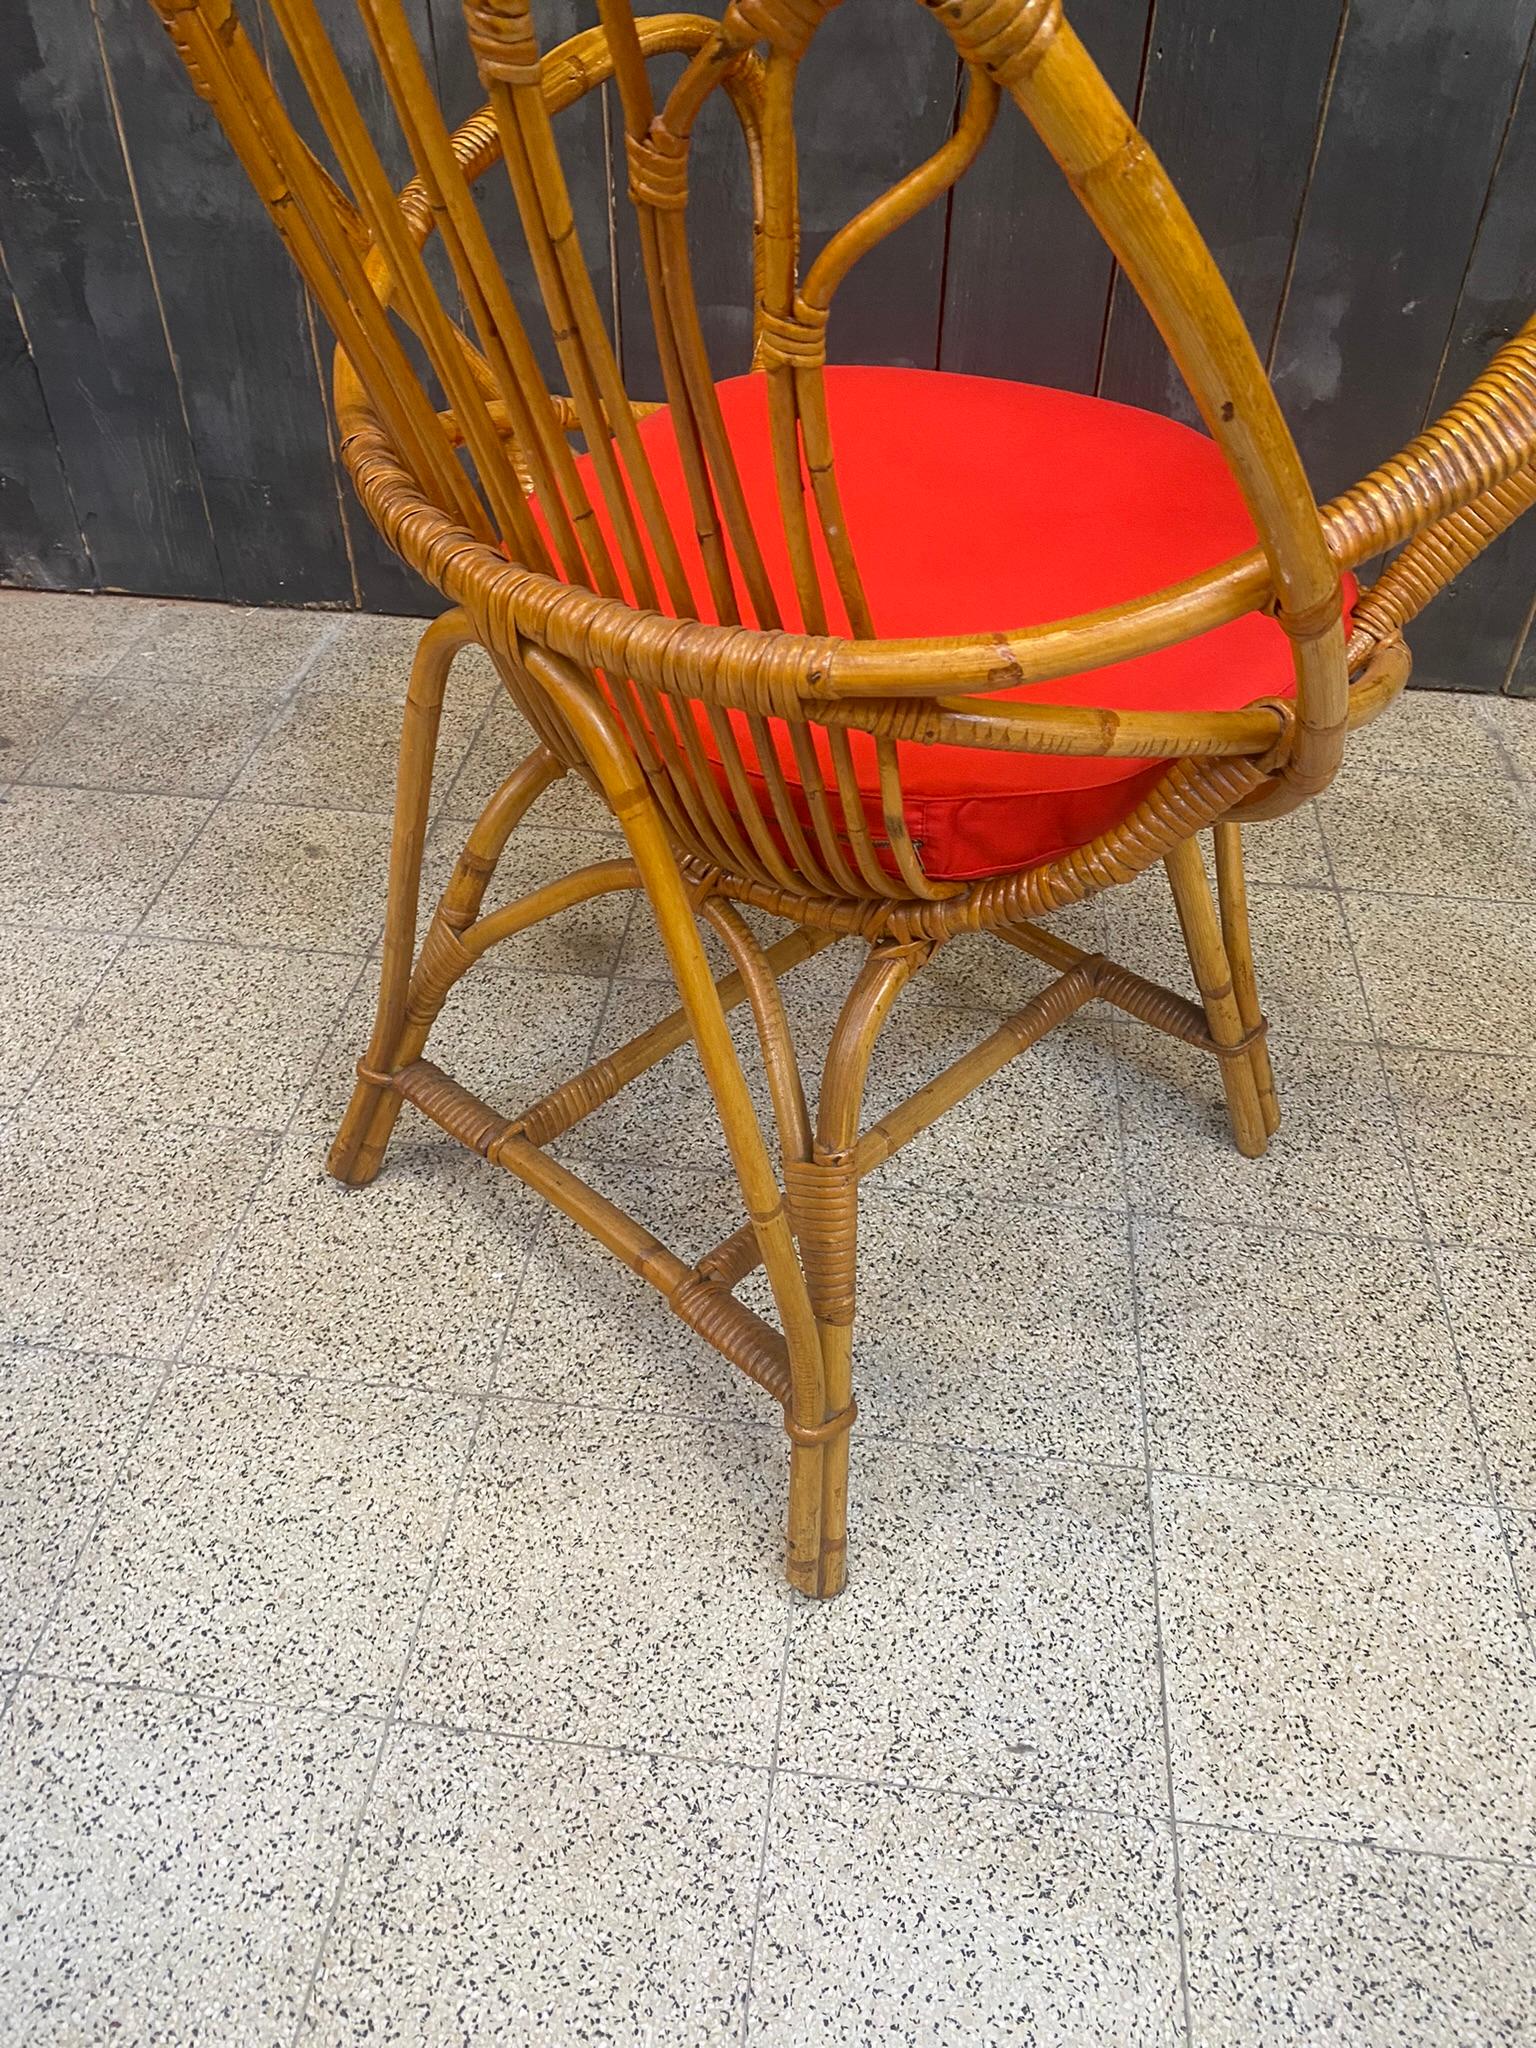 2 Bamboo and Rattan Armchairs and Their Cushions, circa 1970 For Sale 3